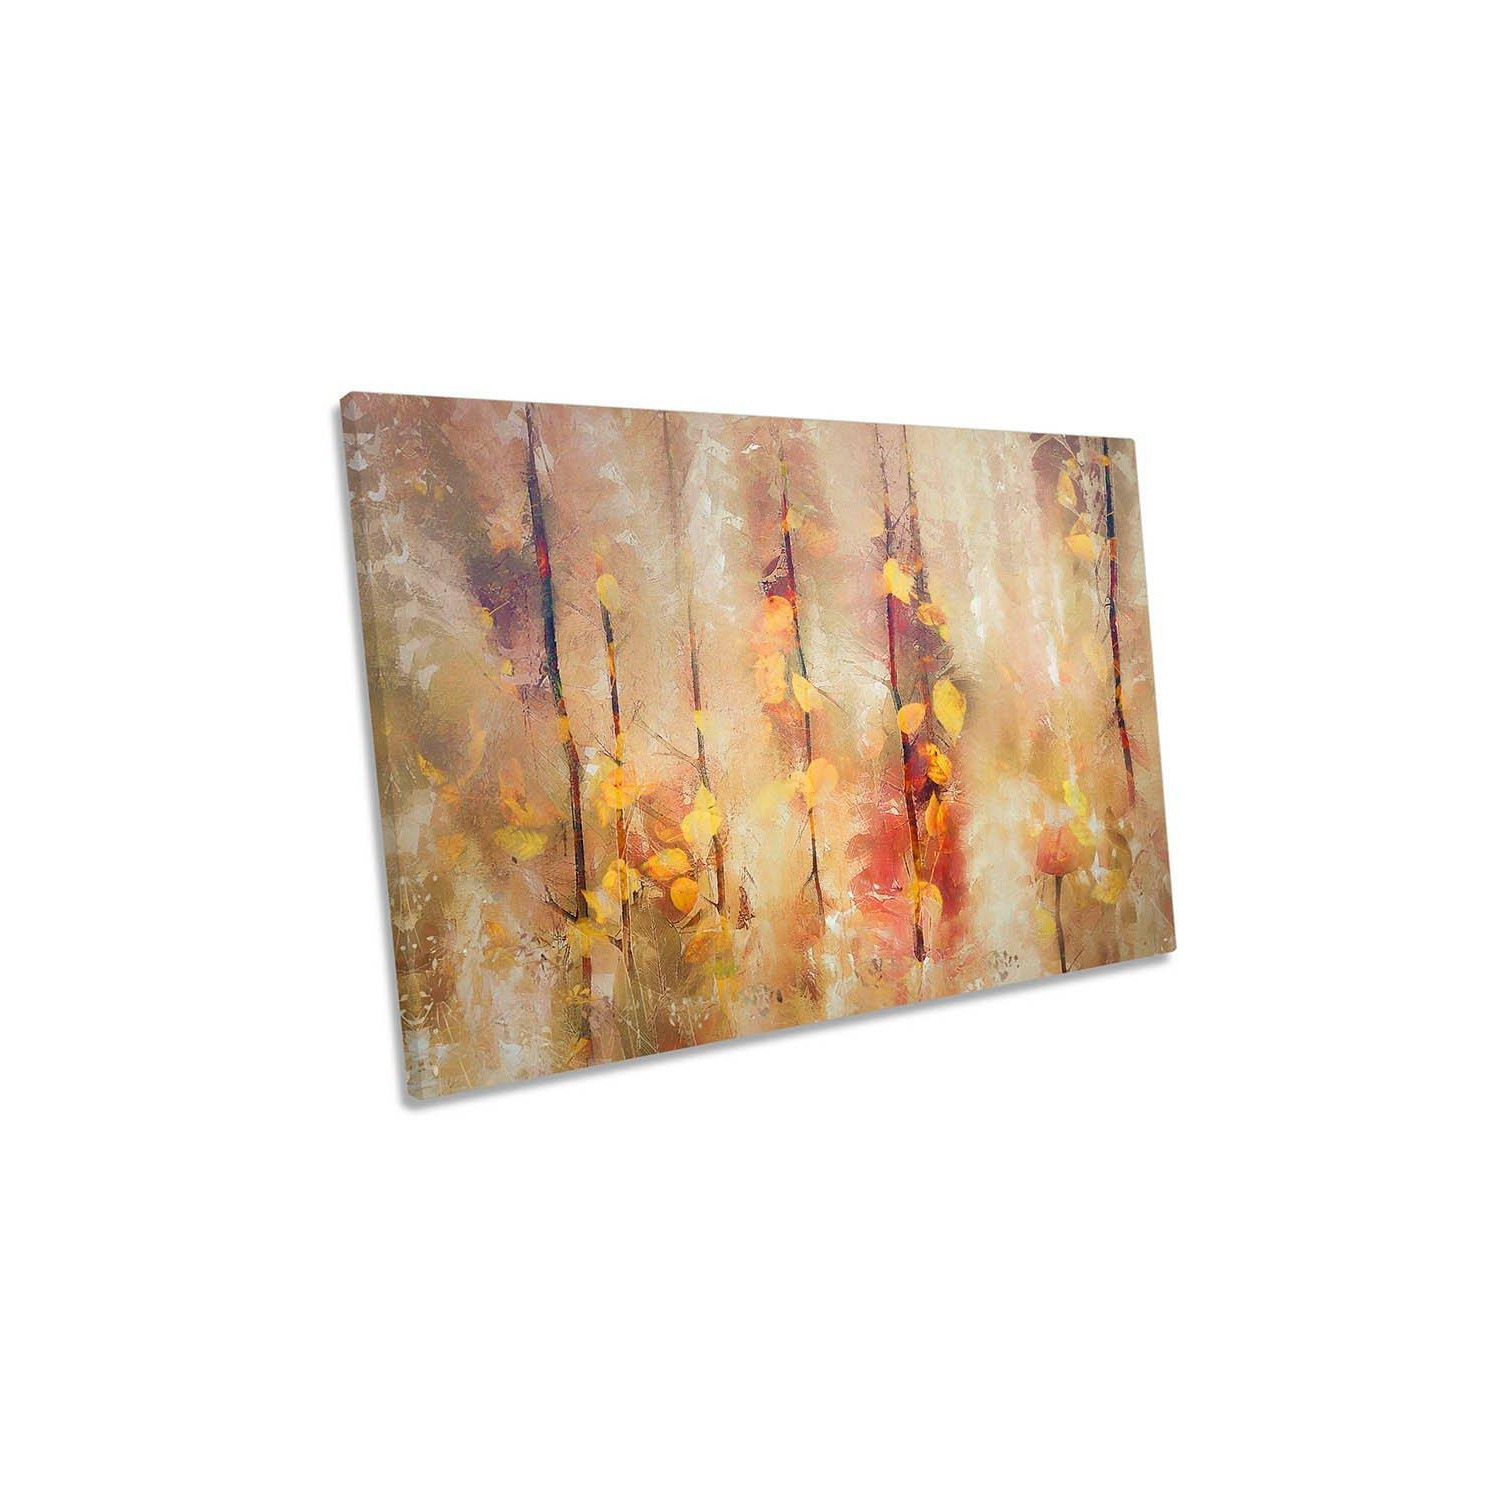 Dreamy Colours Floral Autumn Abstract Canvas Wall Art Picture Print - image 1